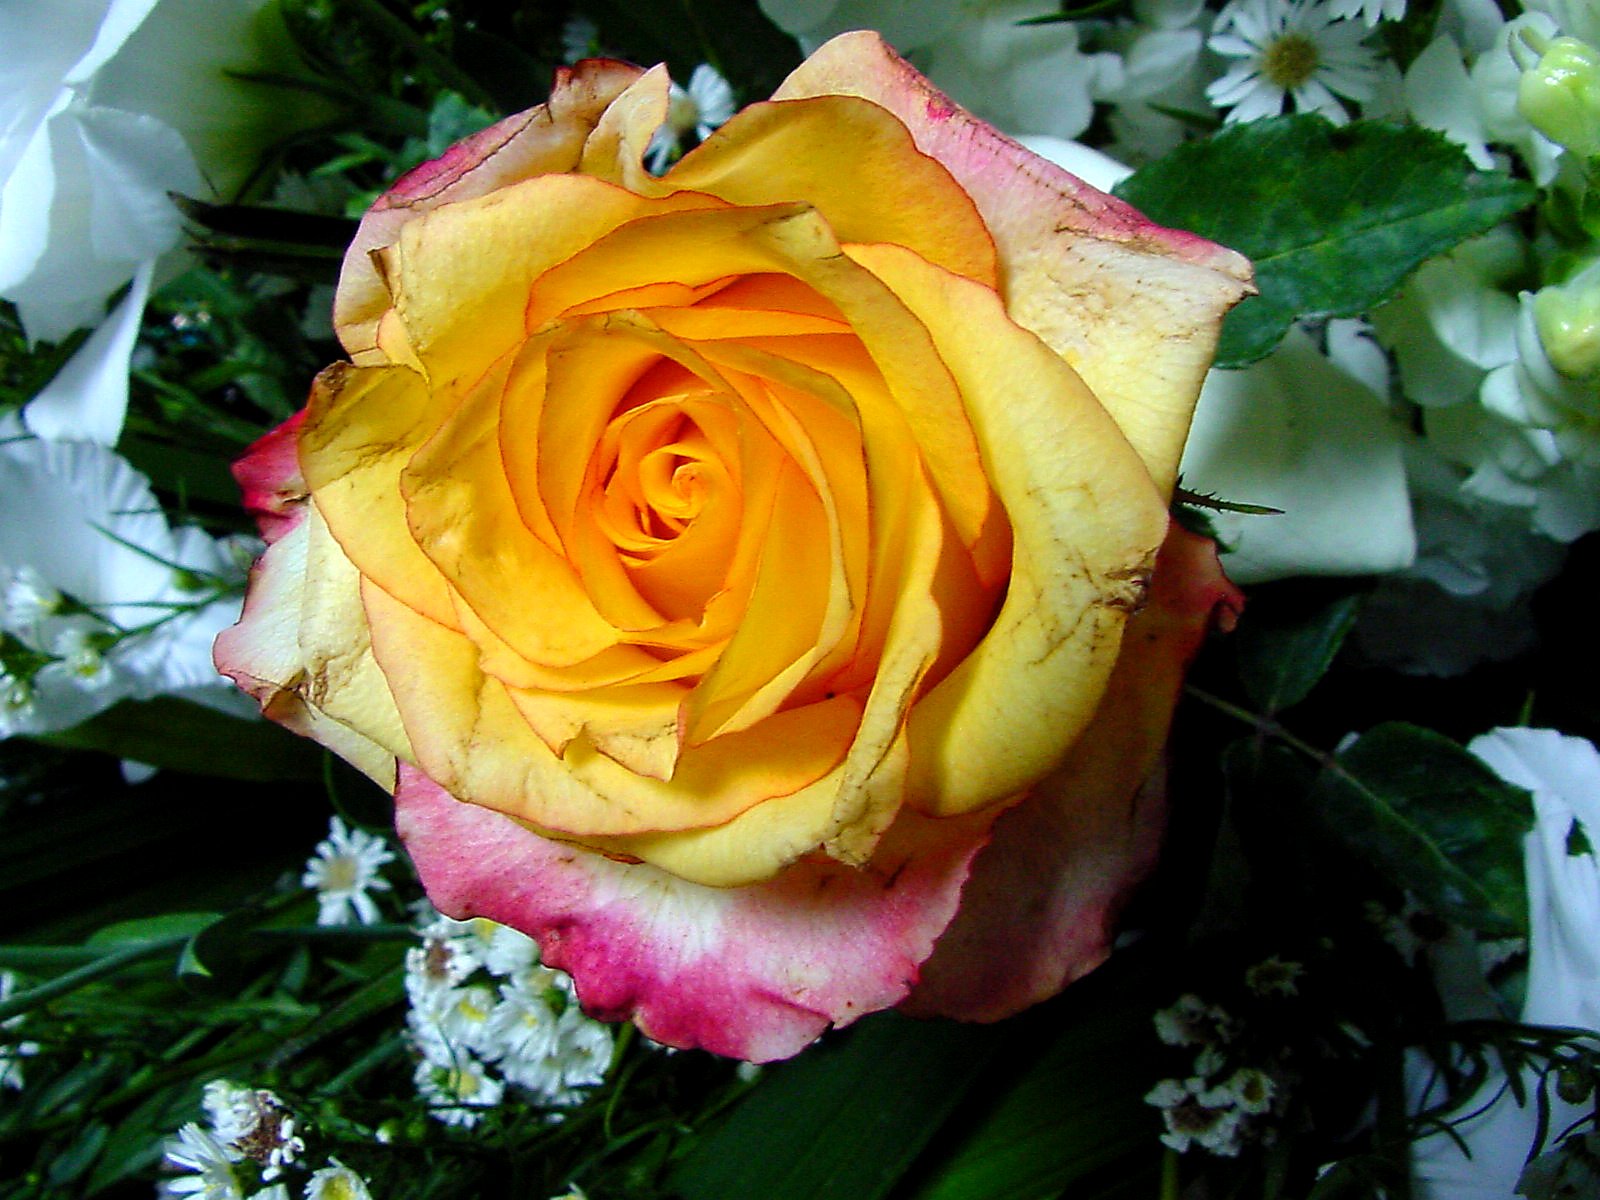 a yellow rose surrounded by white and pink flowers